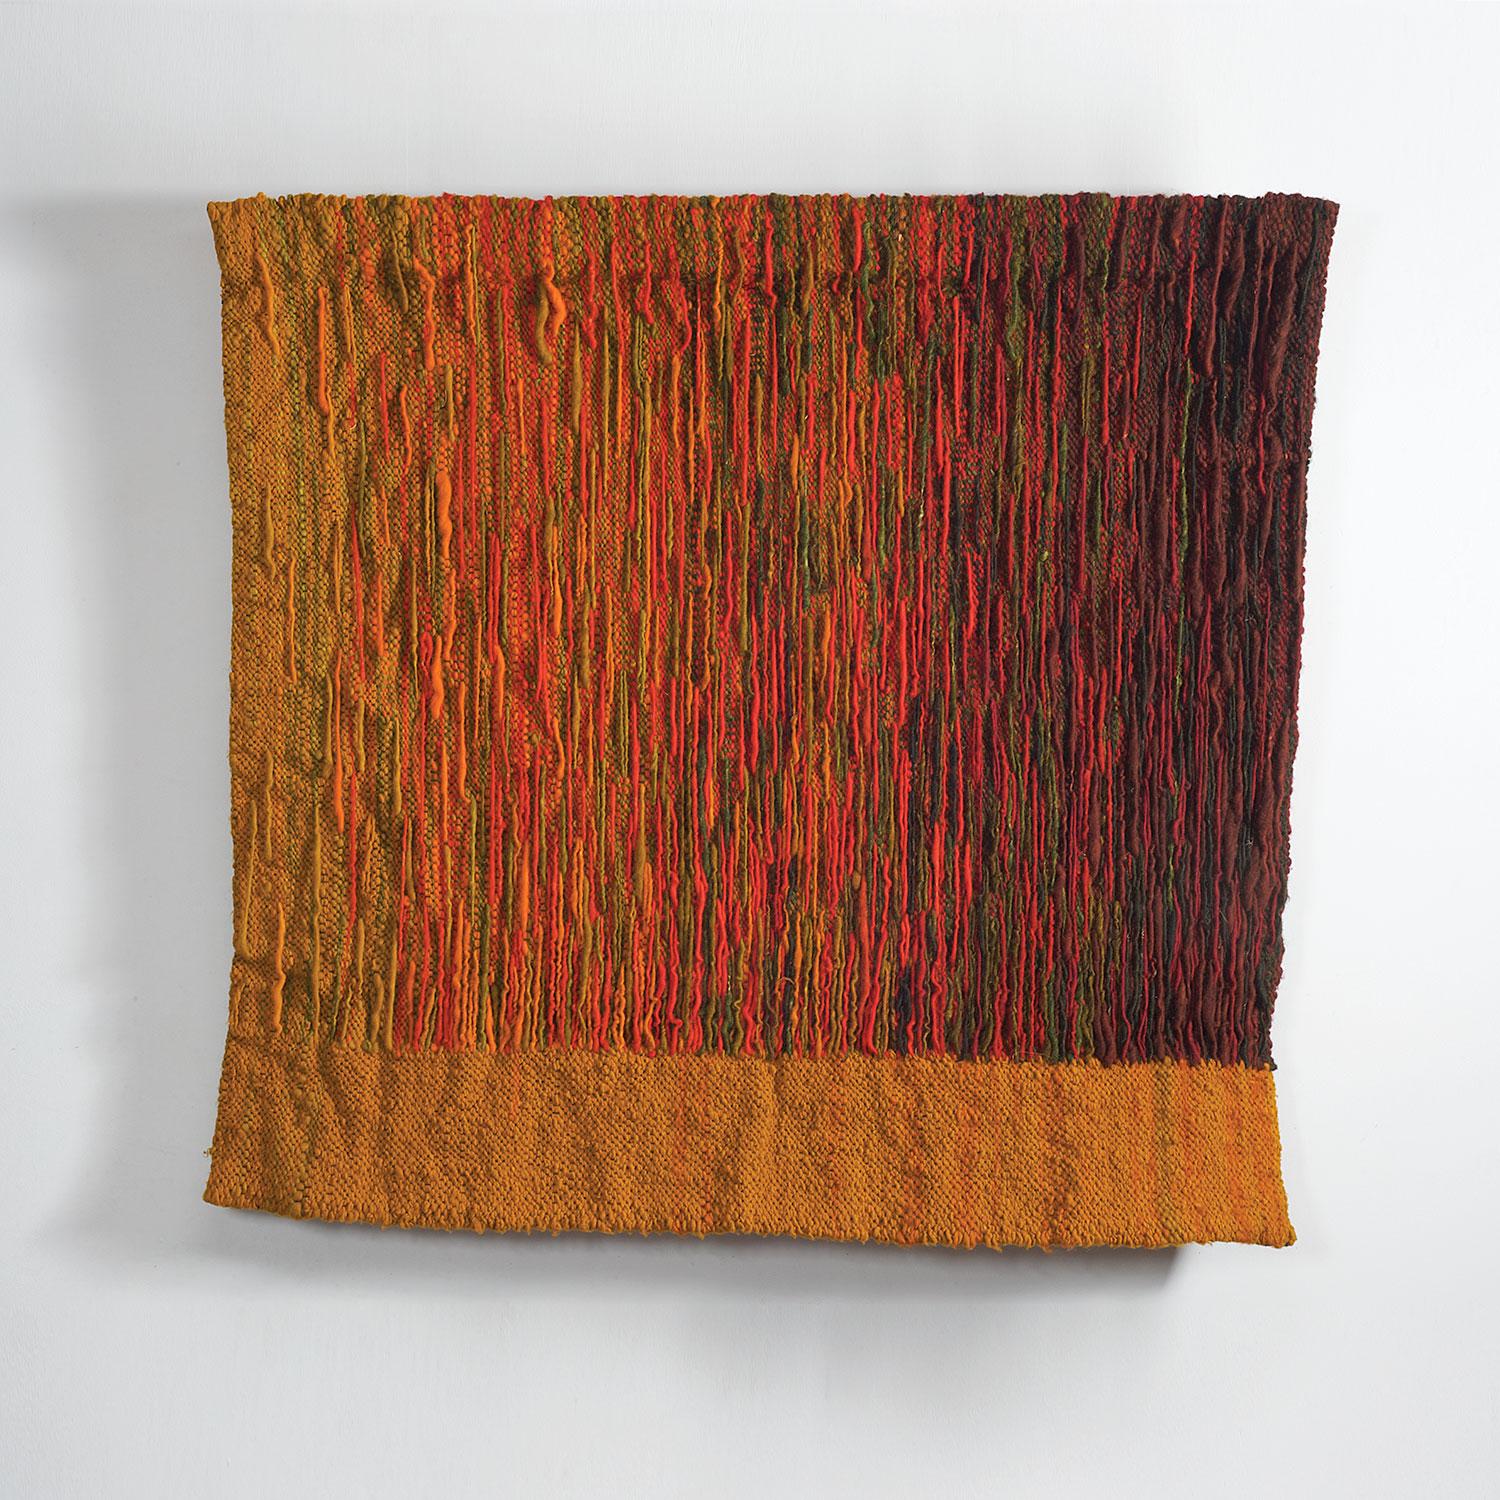 Refleksy (Reflexes), Mid-Century Wool Tapestry, Abstract Textile Wall Sculpture